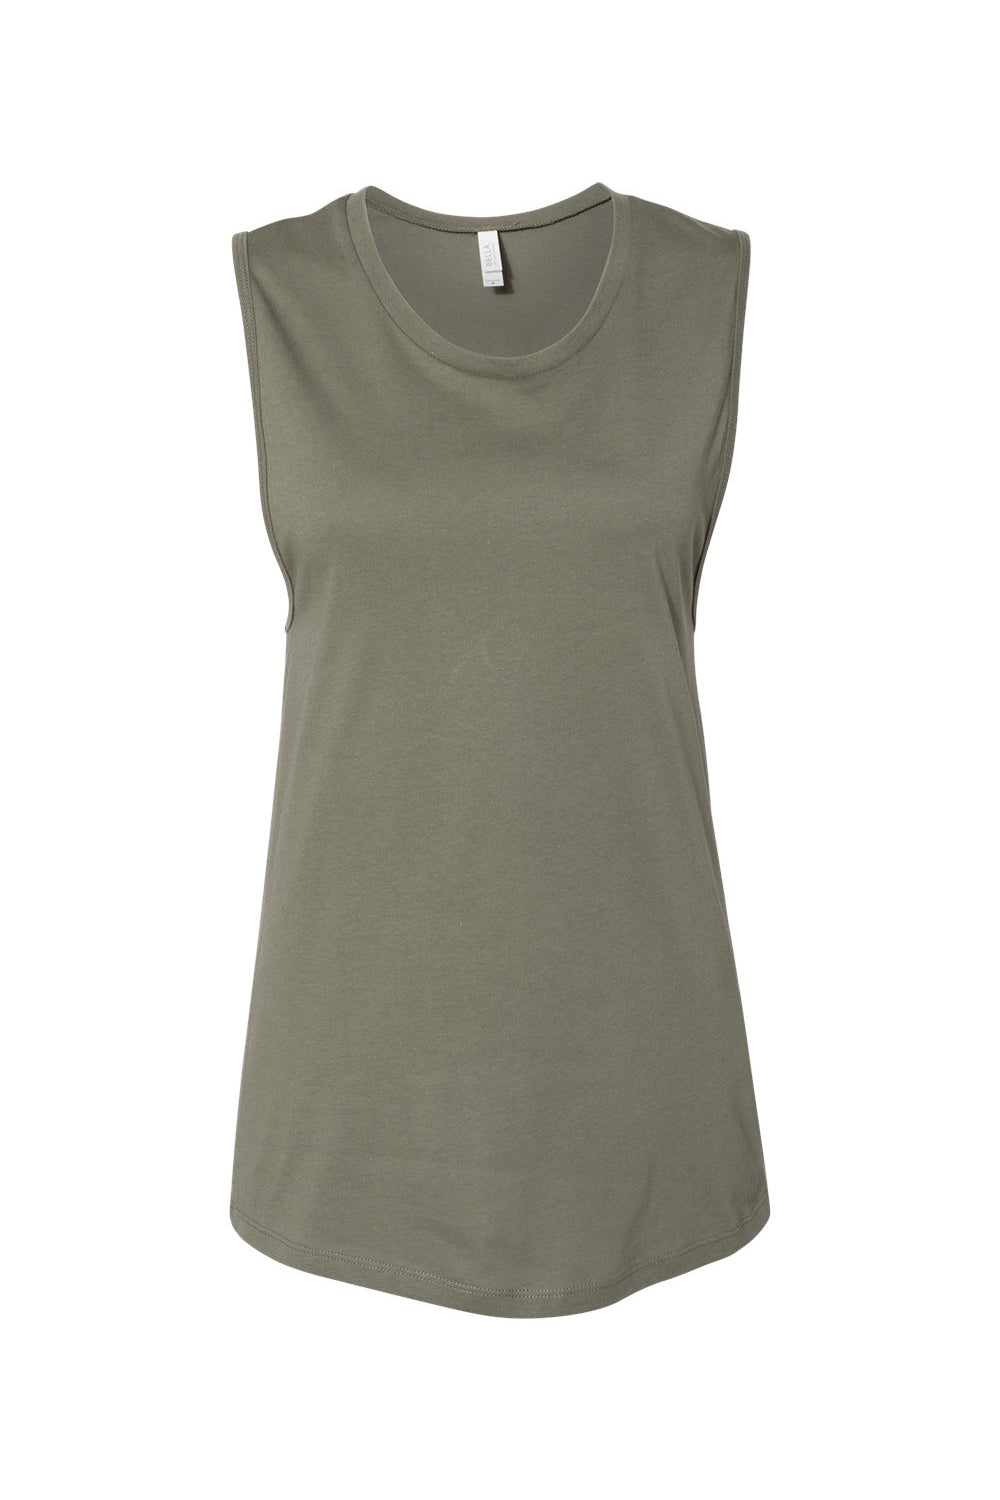 Bella + Canvas BC6003/B6003/6003 Womens Jersey Muscle Tank Top Military Green Flat Front